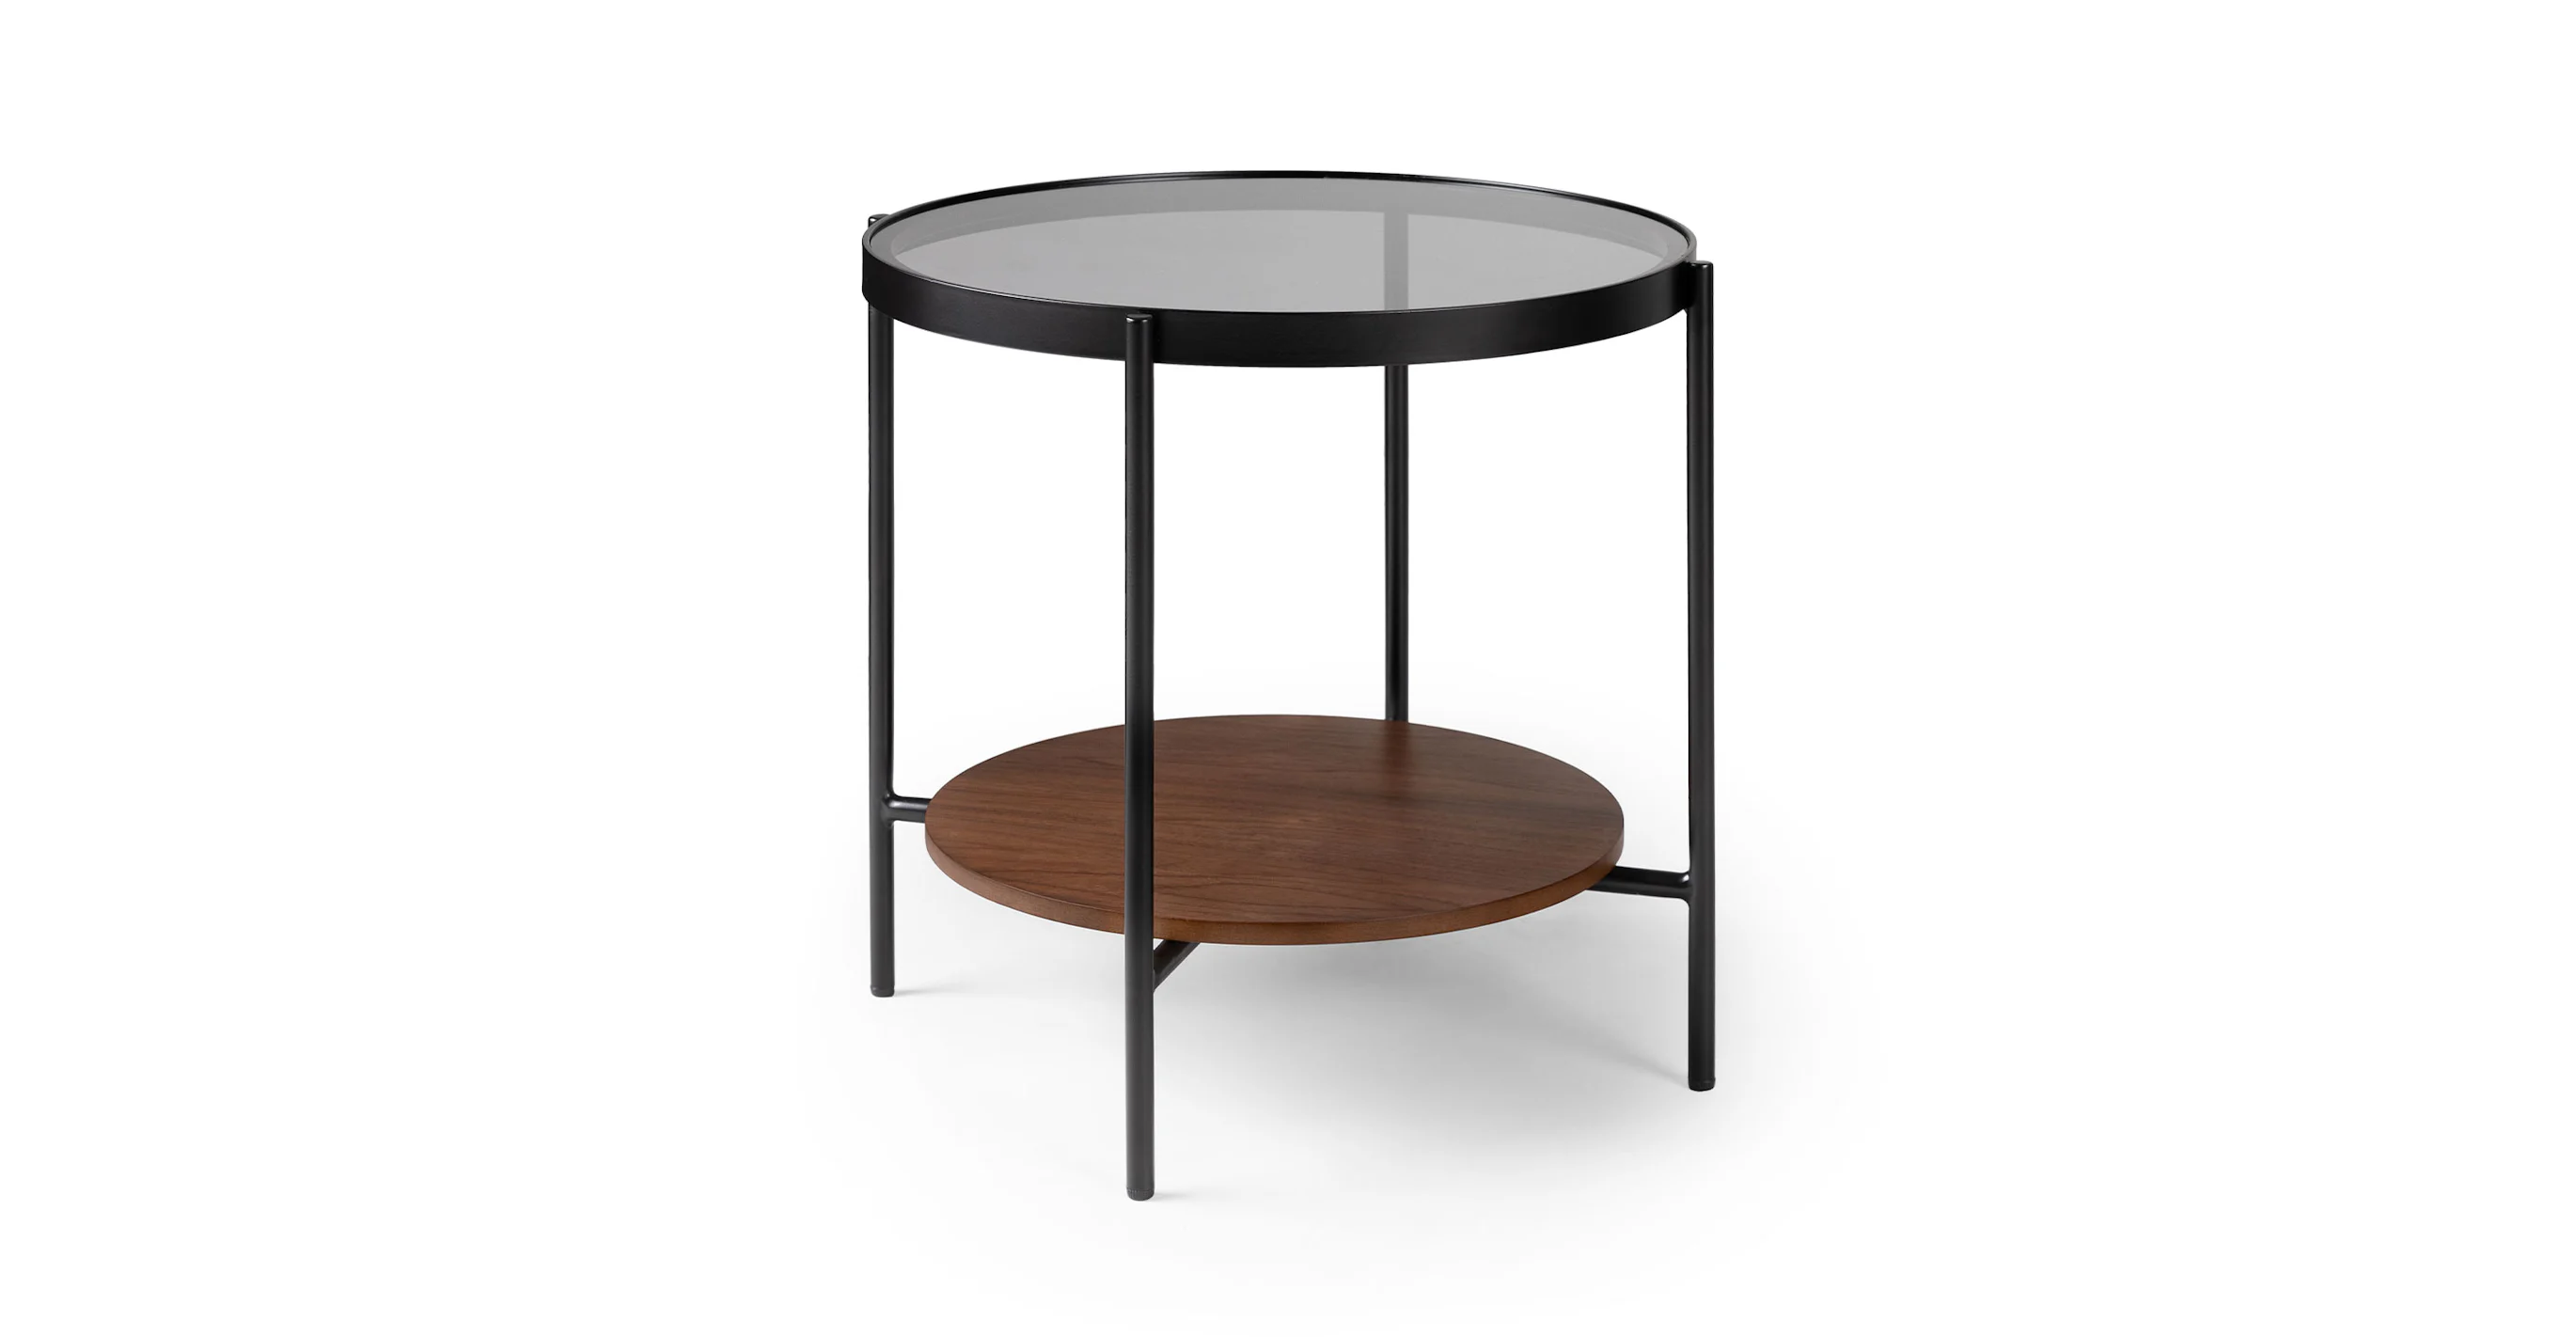 Shop Vitri Walnut Side Table from Article on Openhaus